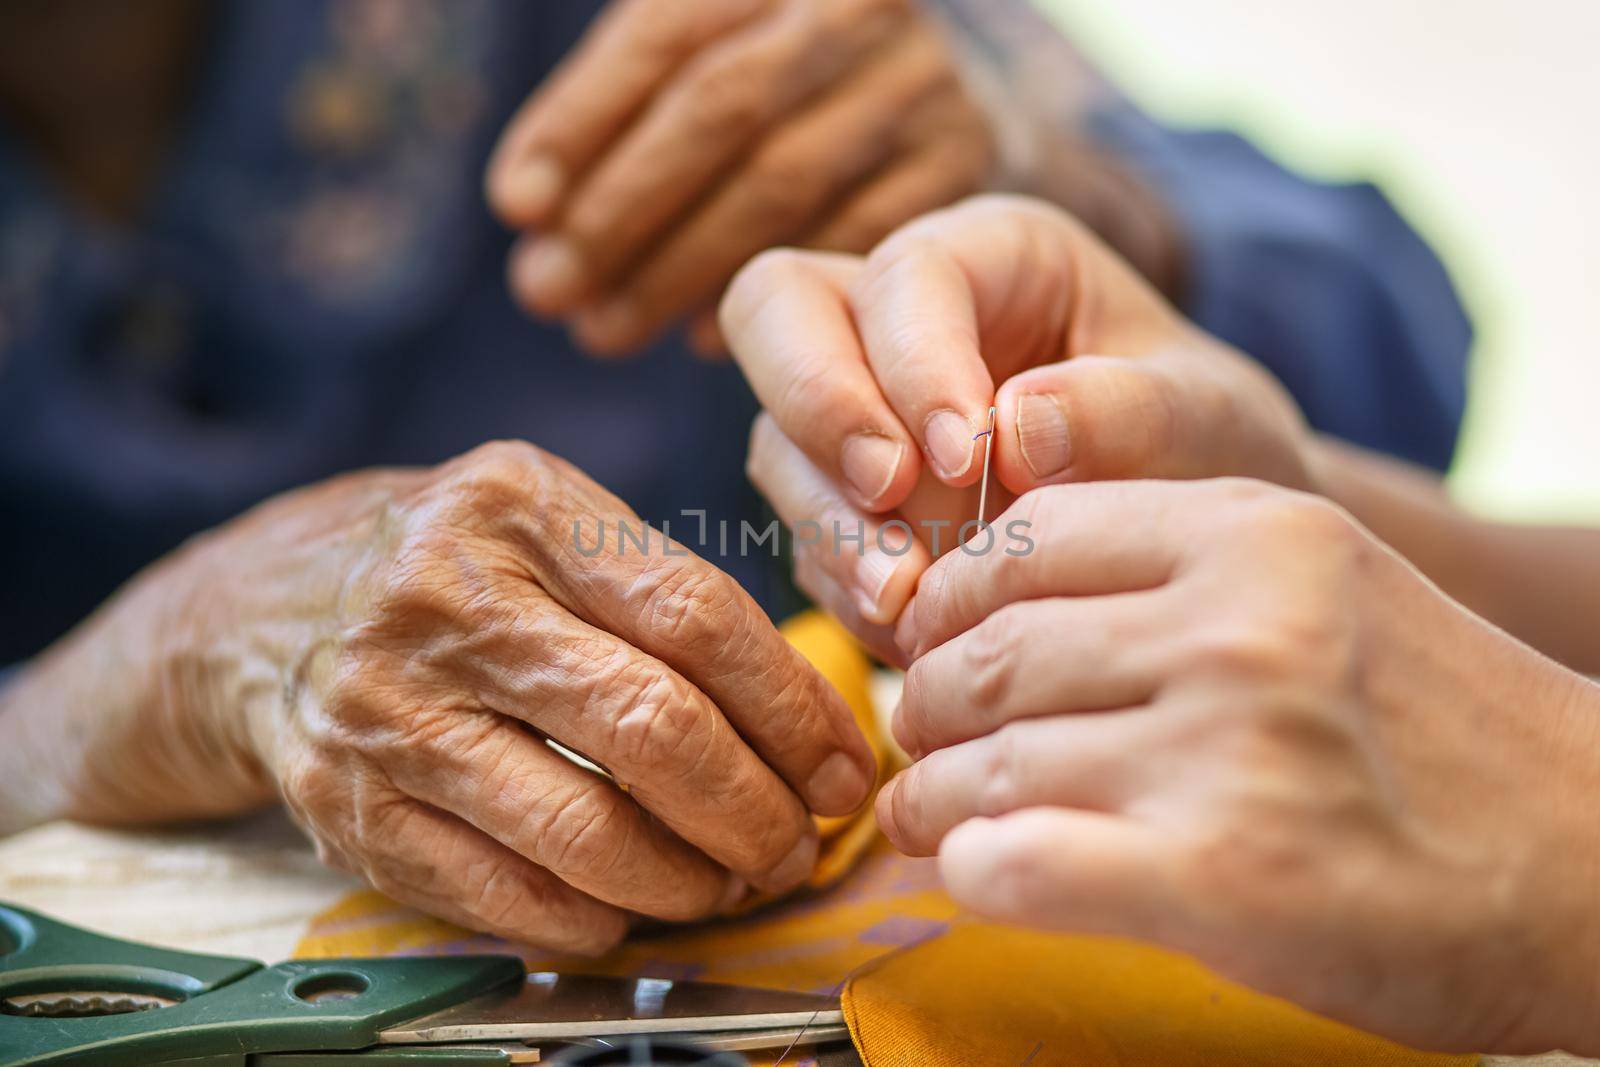 Caregiver holding thread the needle for elderly woman in the cloth crafts occupational therapy for Alzheimers or dementia